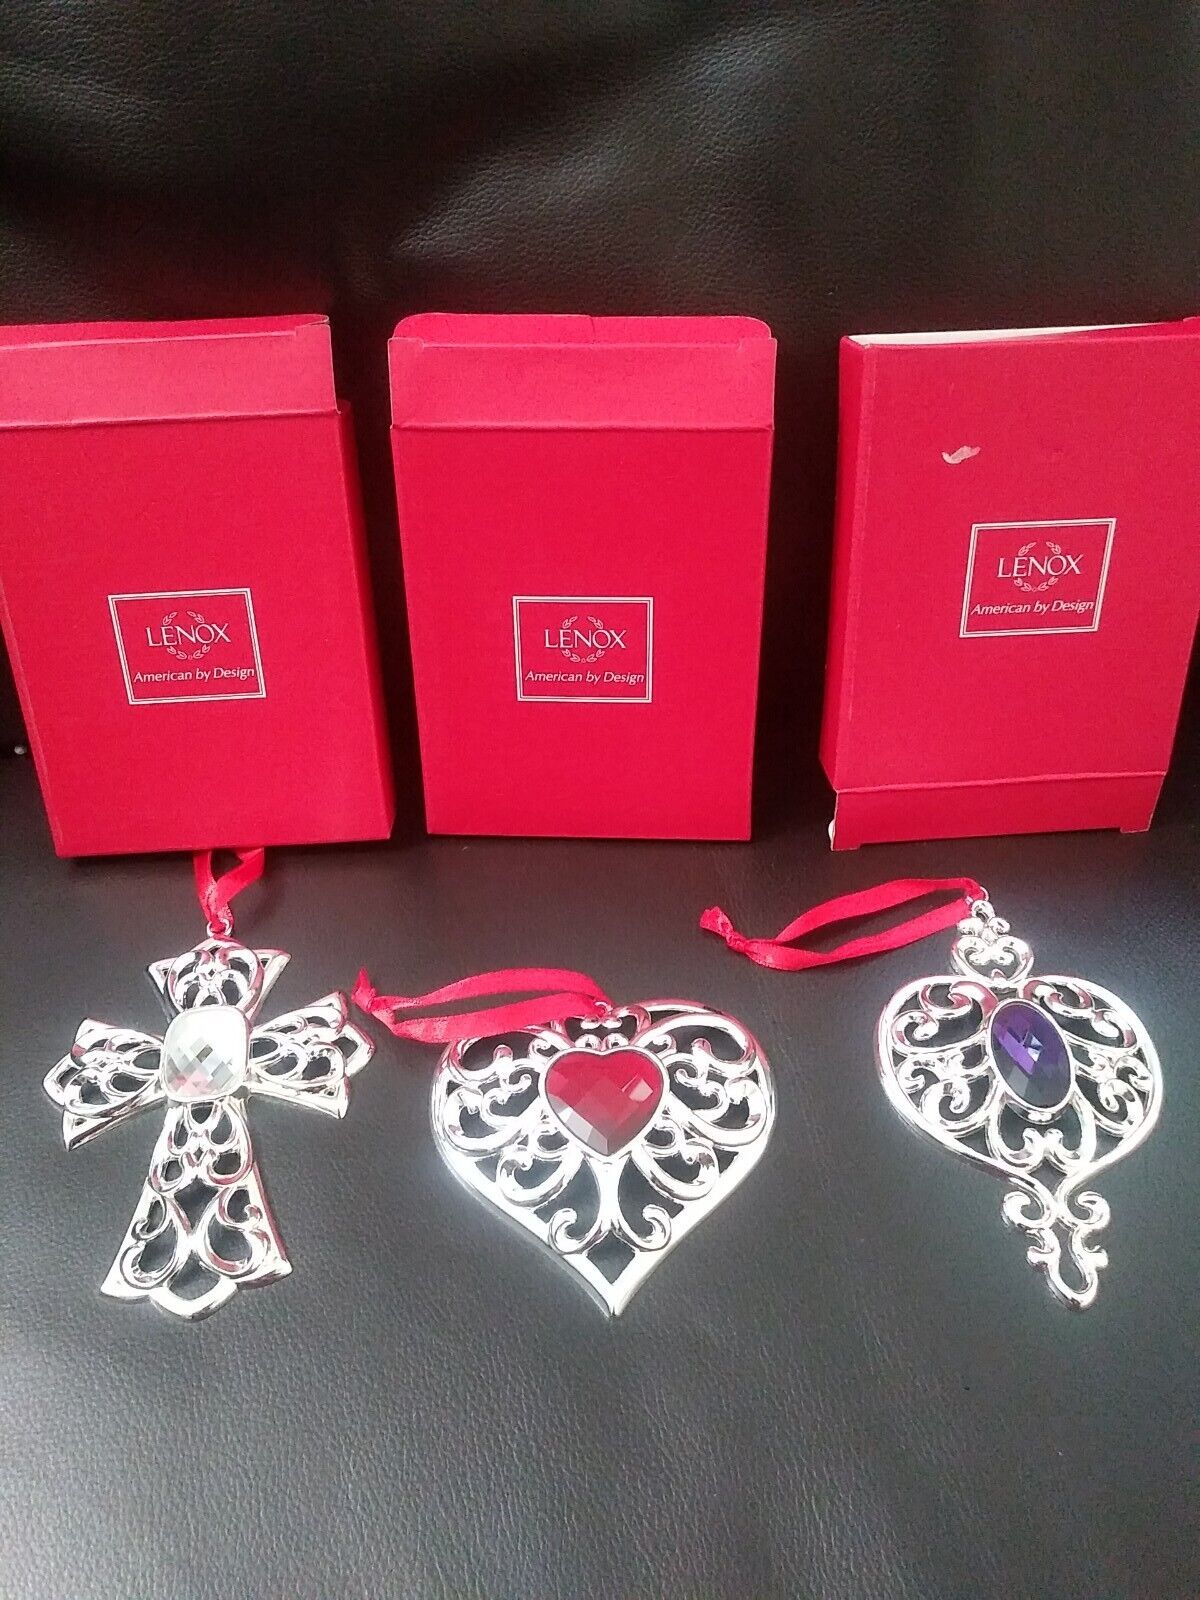 Lenox Bejeweled Ornaments Silverplated . New In Box.(3 Pieces)